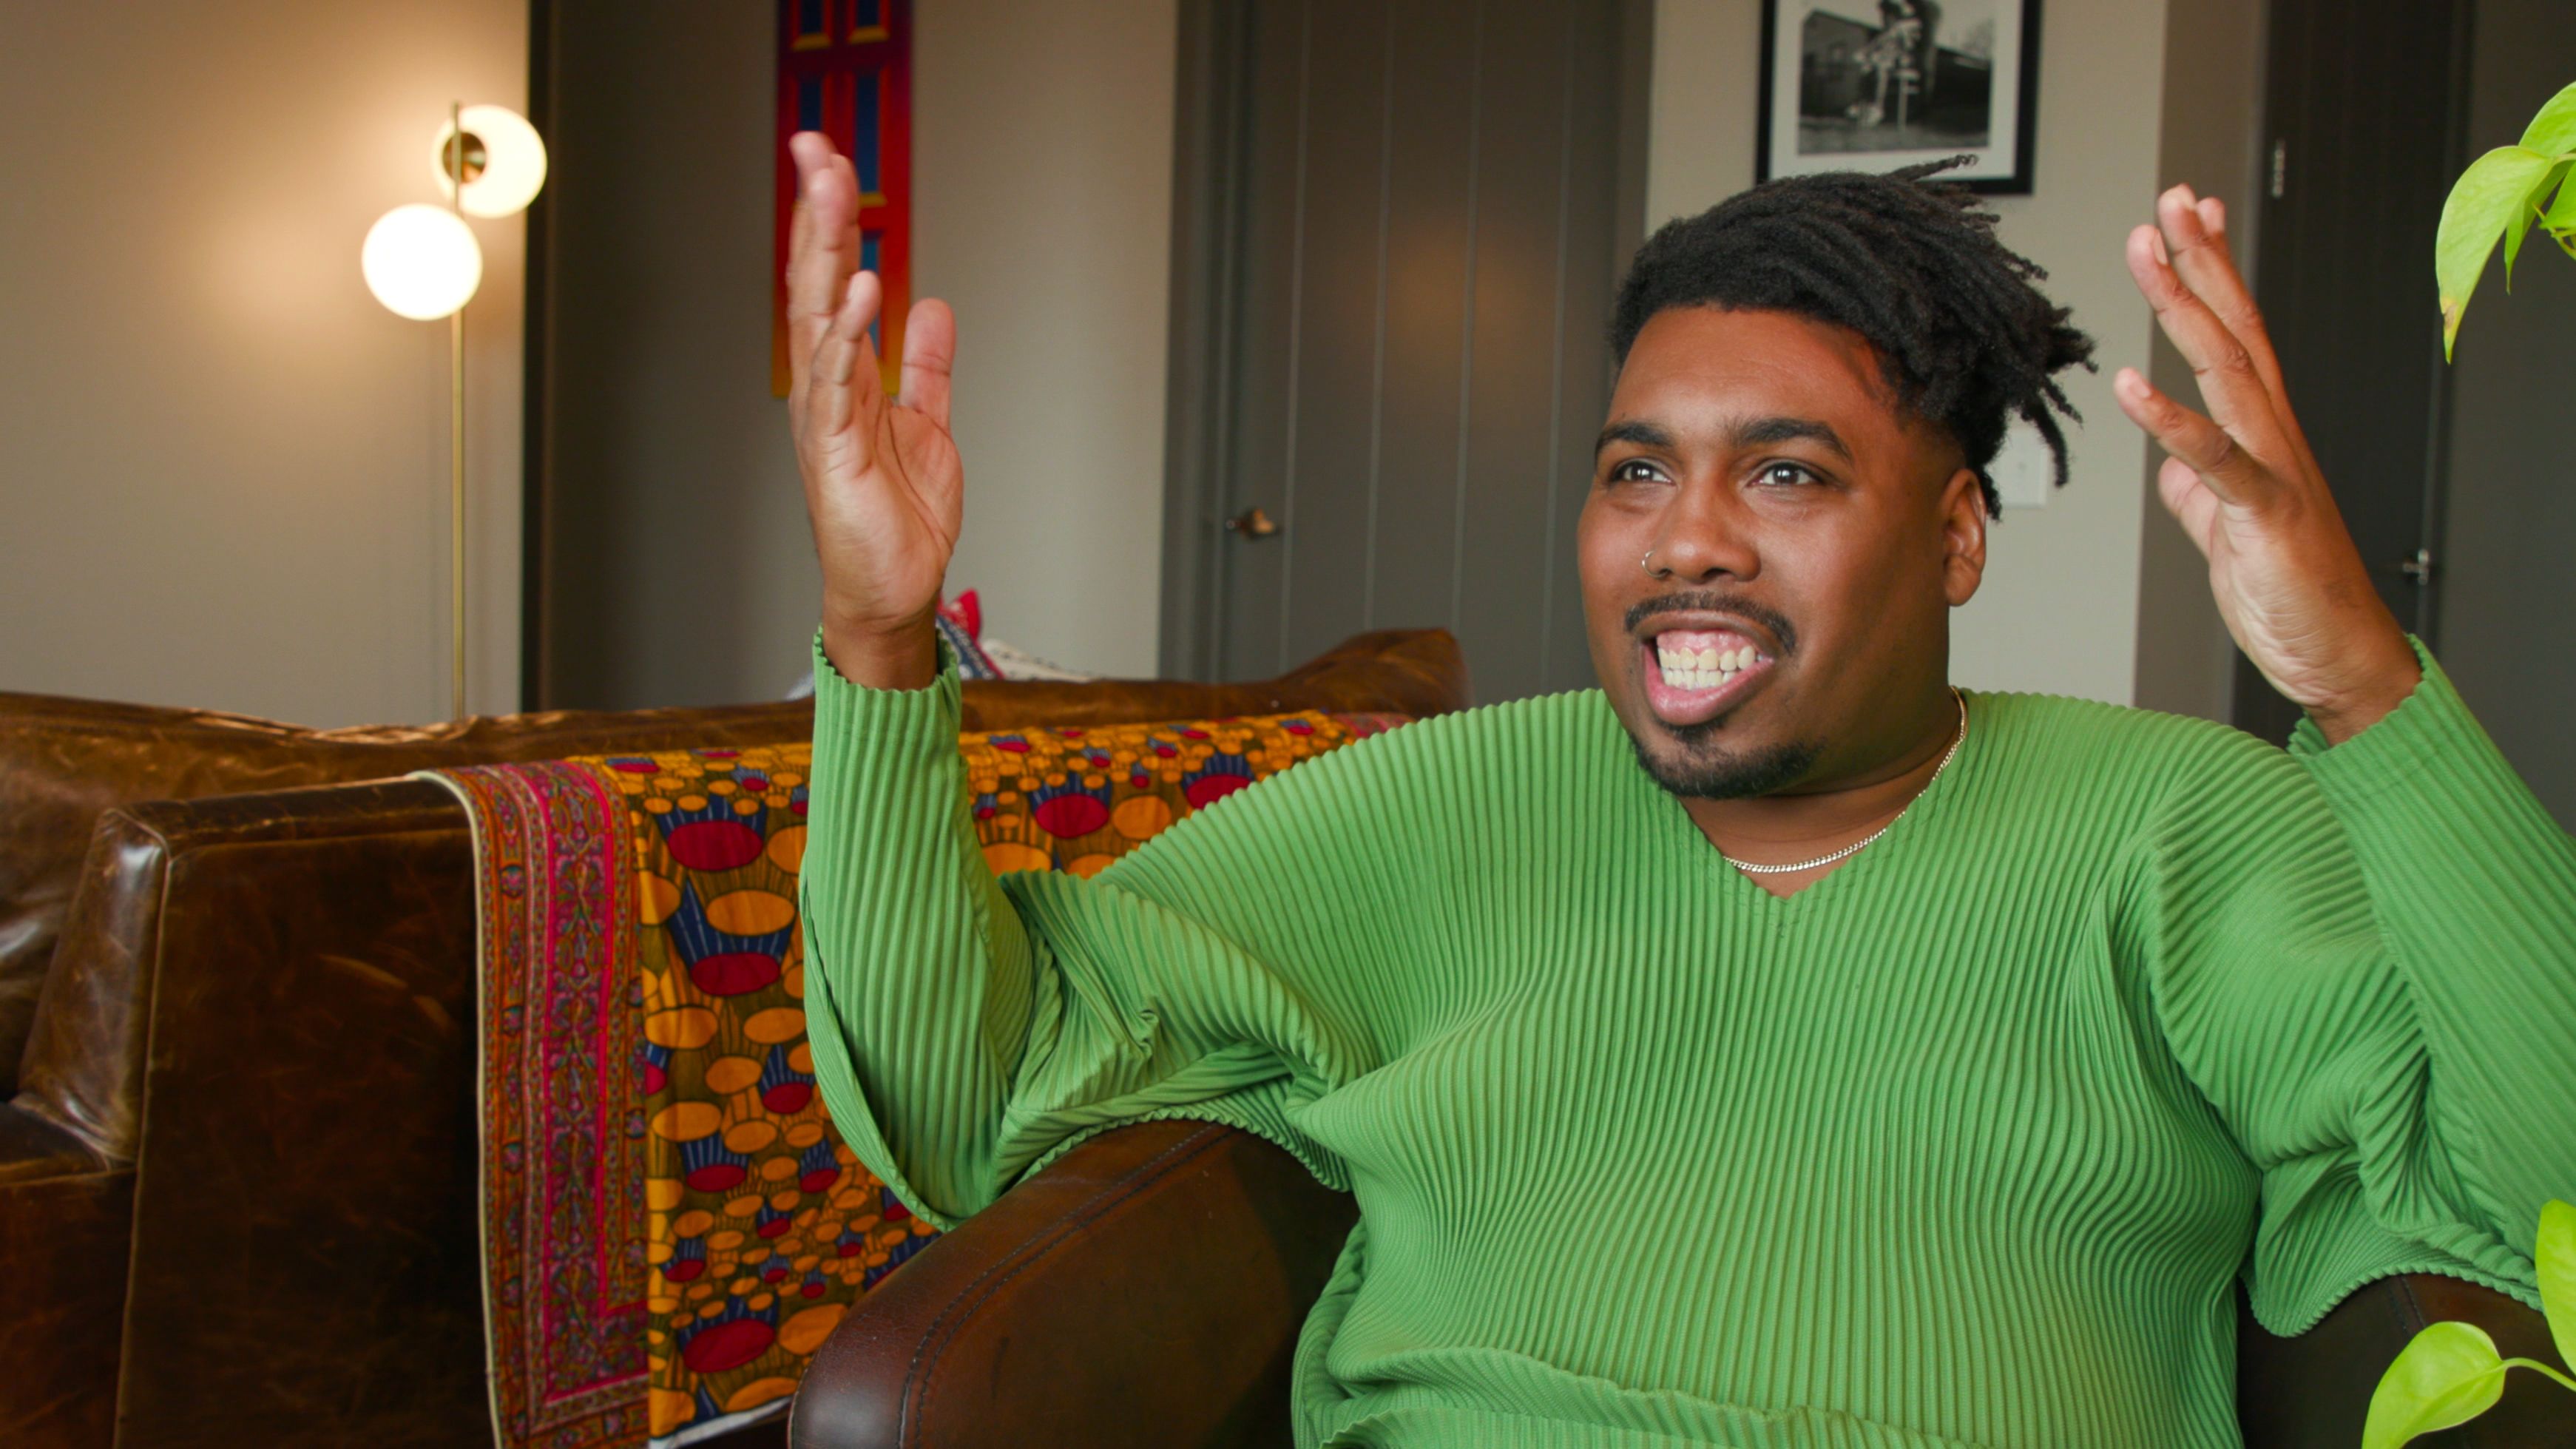 A Black man in a green sweater raises his arms to gesticulate as he talks while sitting.